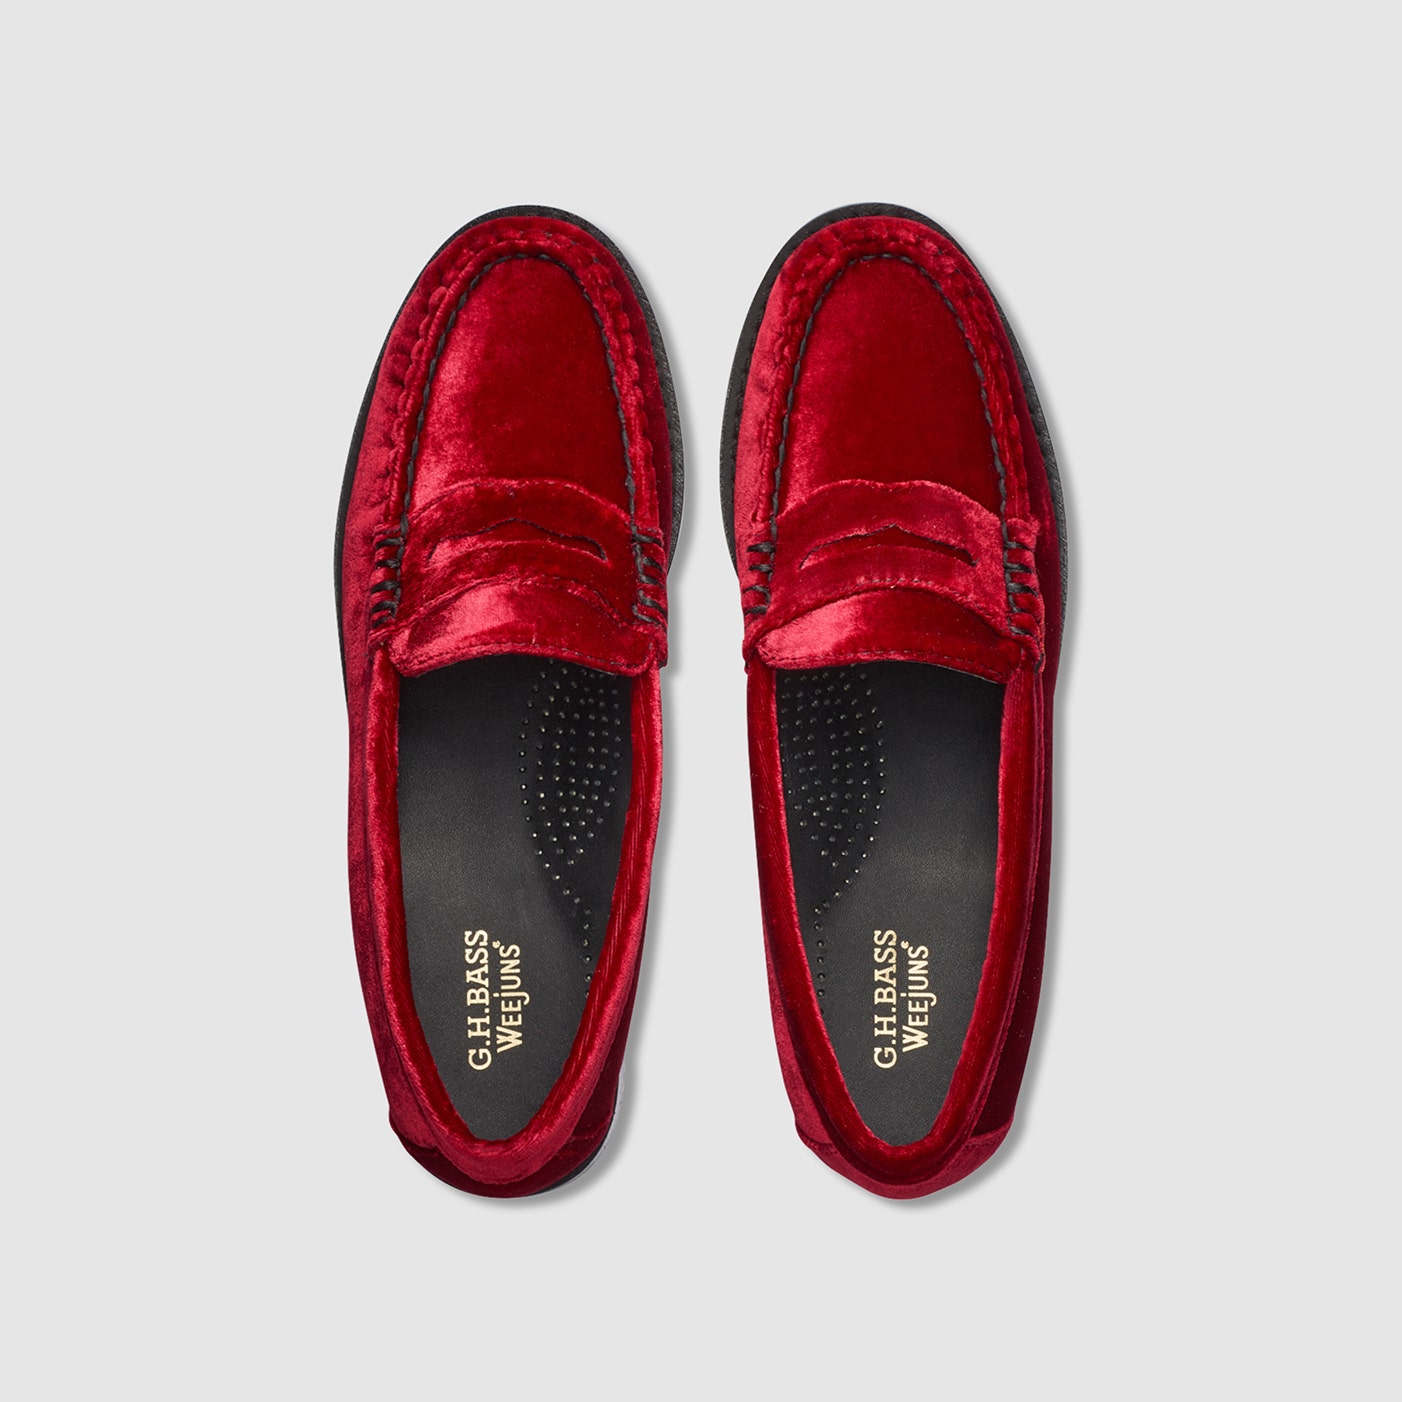 G.H Bass Whitney Velvet Weejuns Loafer in Wine BAX3W016 | Shop from eightywingold an official brand partner for G.H. Bass in Canada and US.